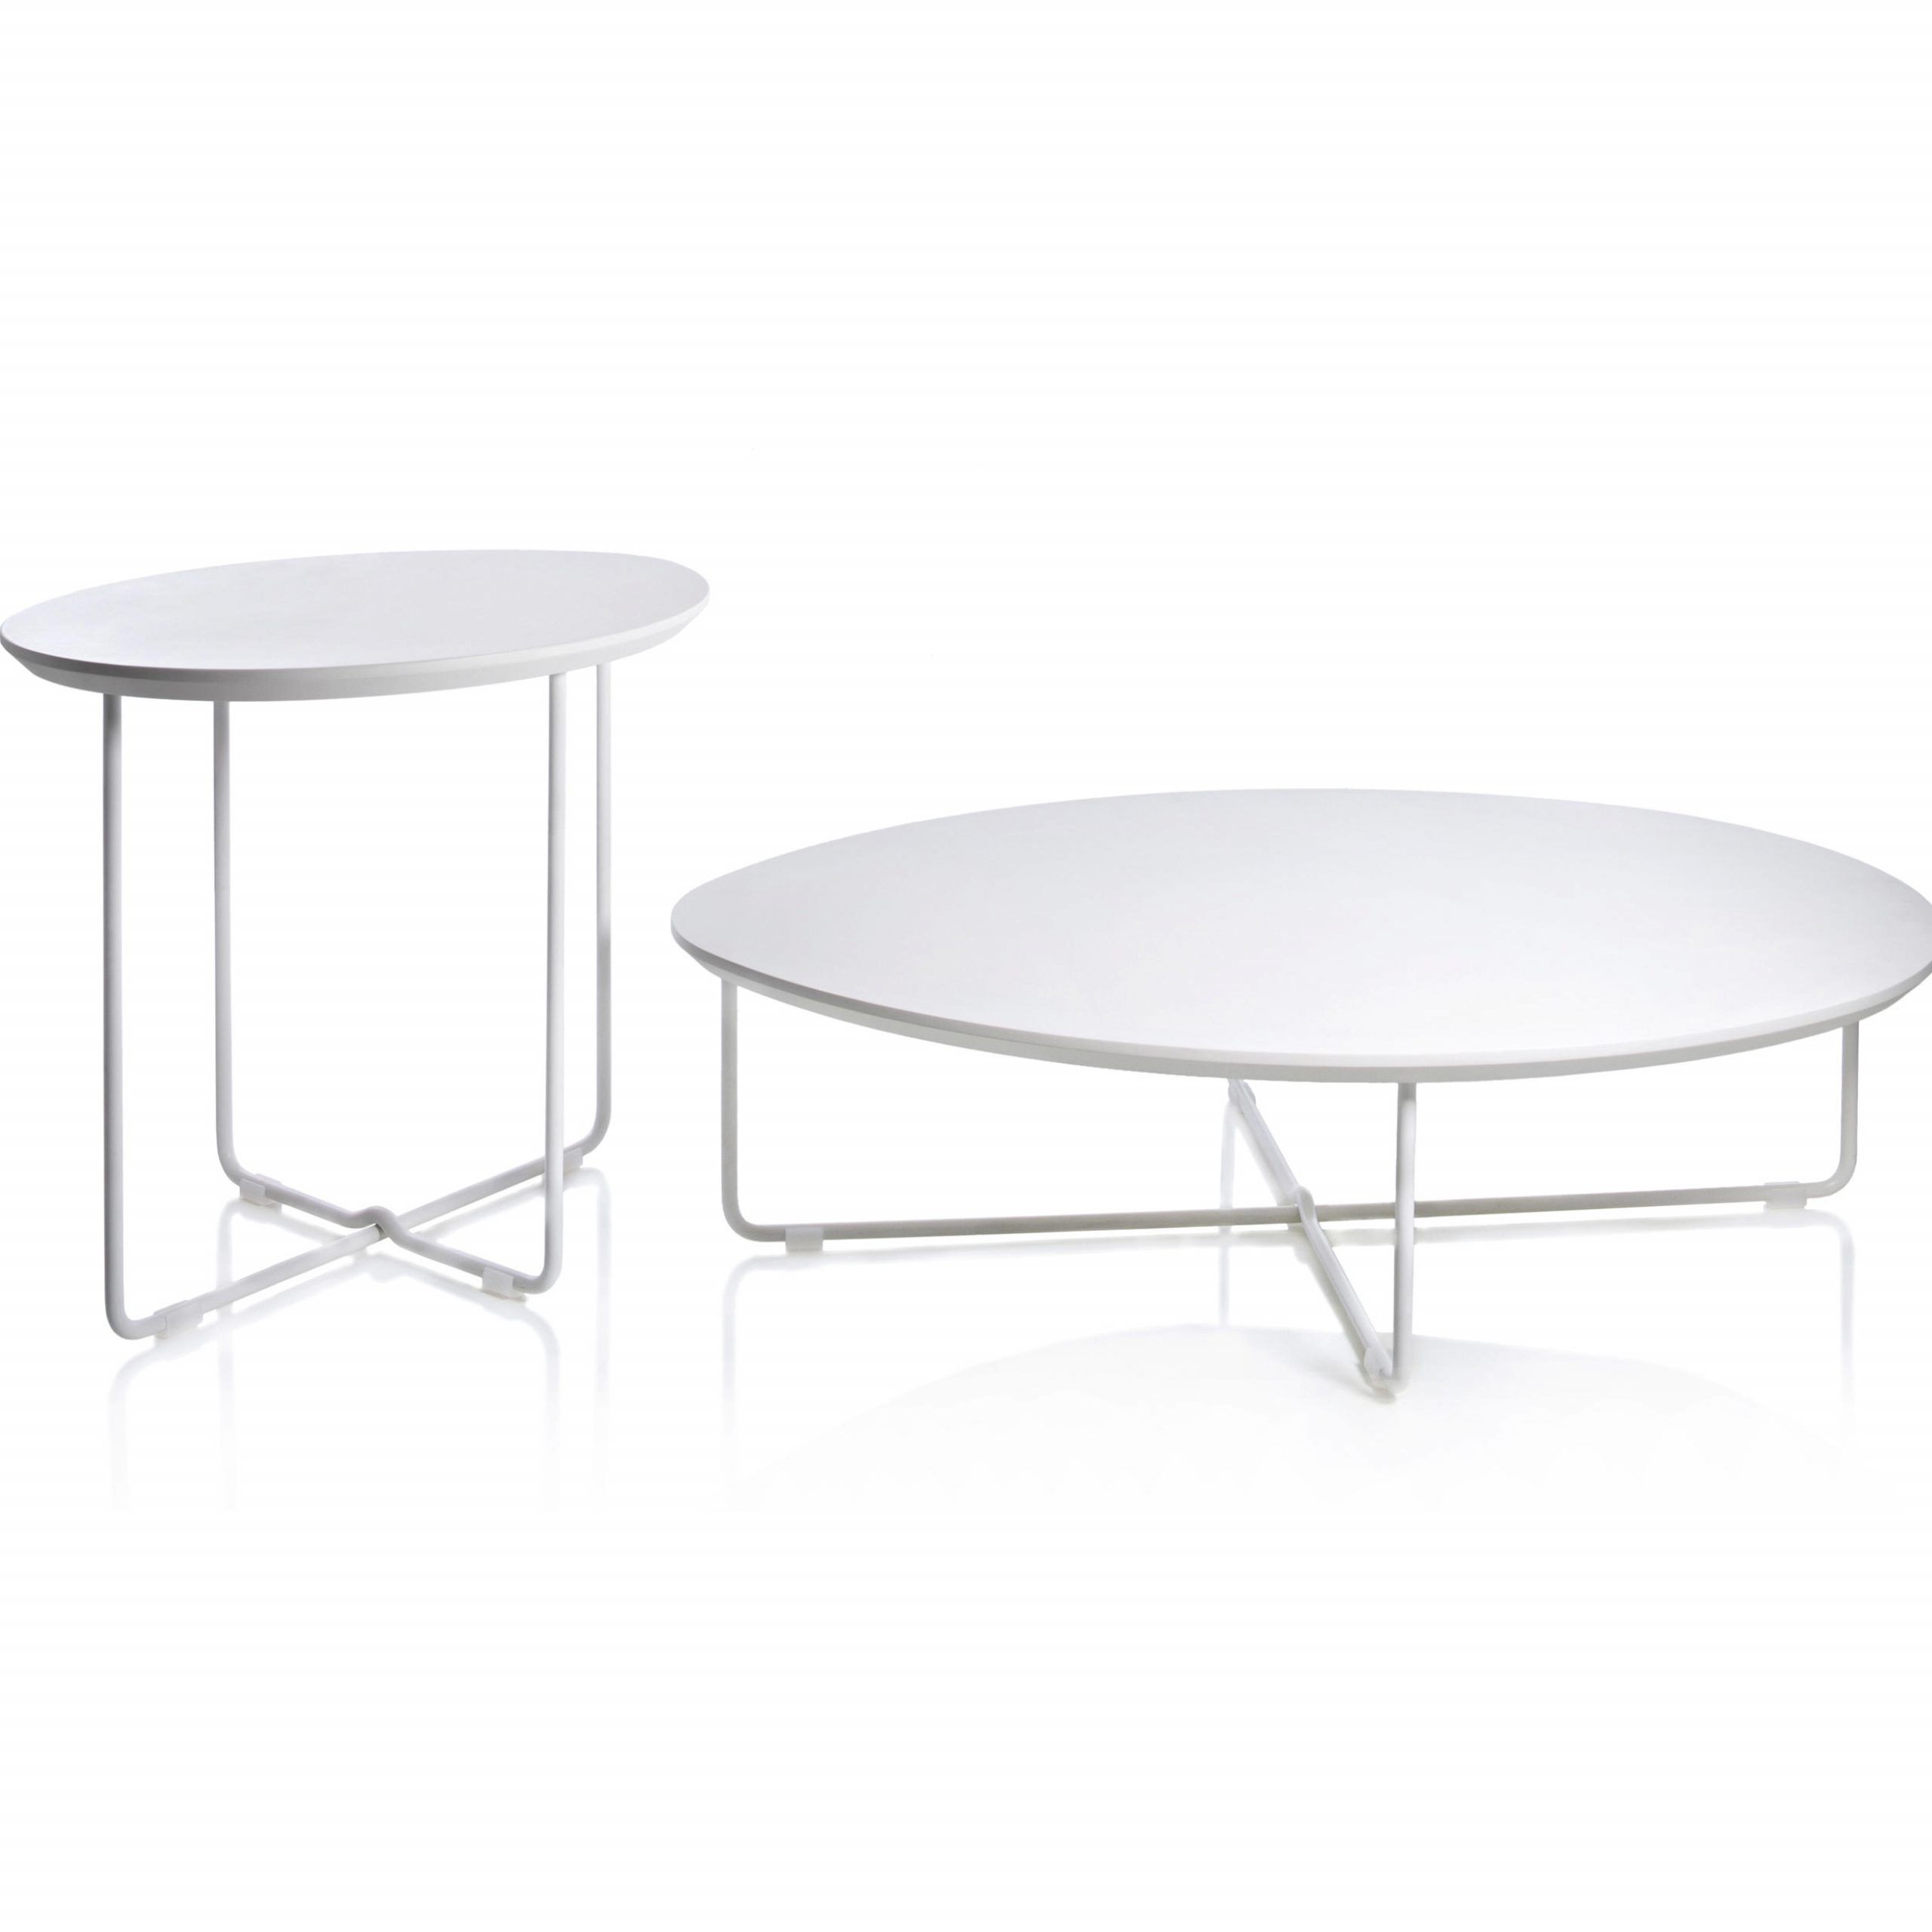 Clyde Coffee Table & Designer Furniture | Architonic Throughout Most Recently Released Clyde Round Bar Tables (View 20 of 25)